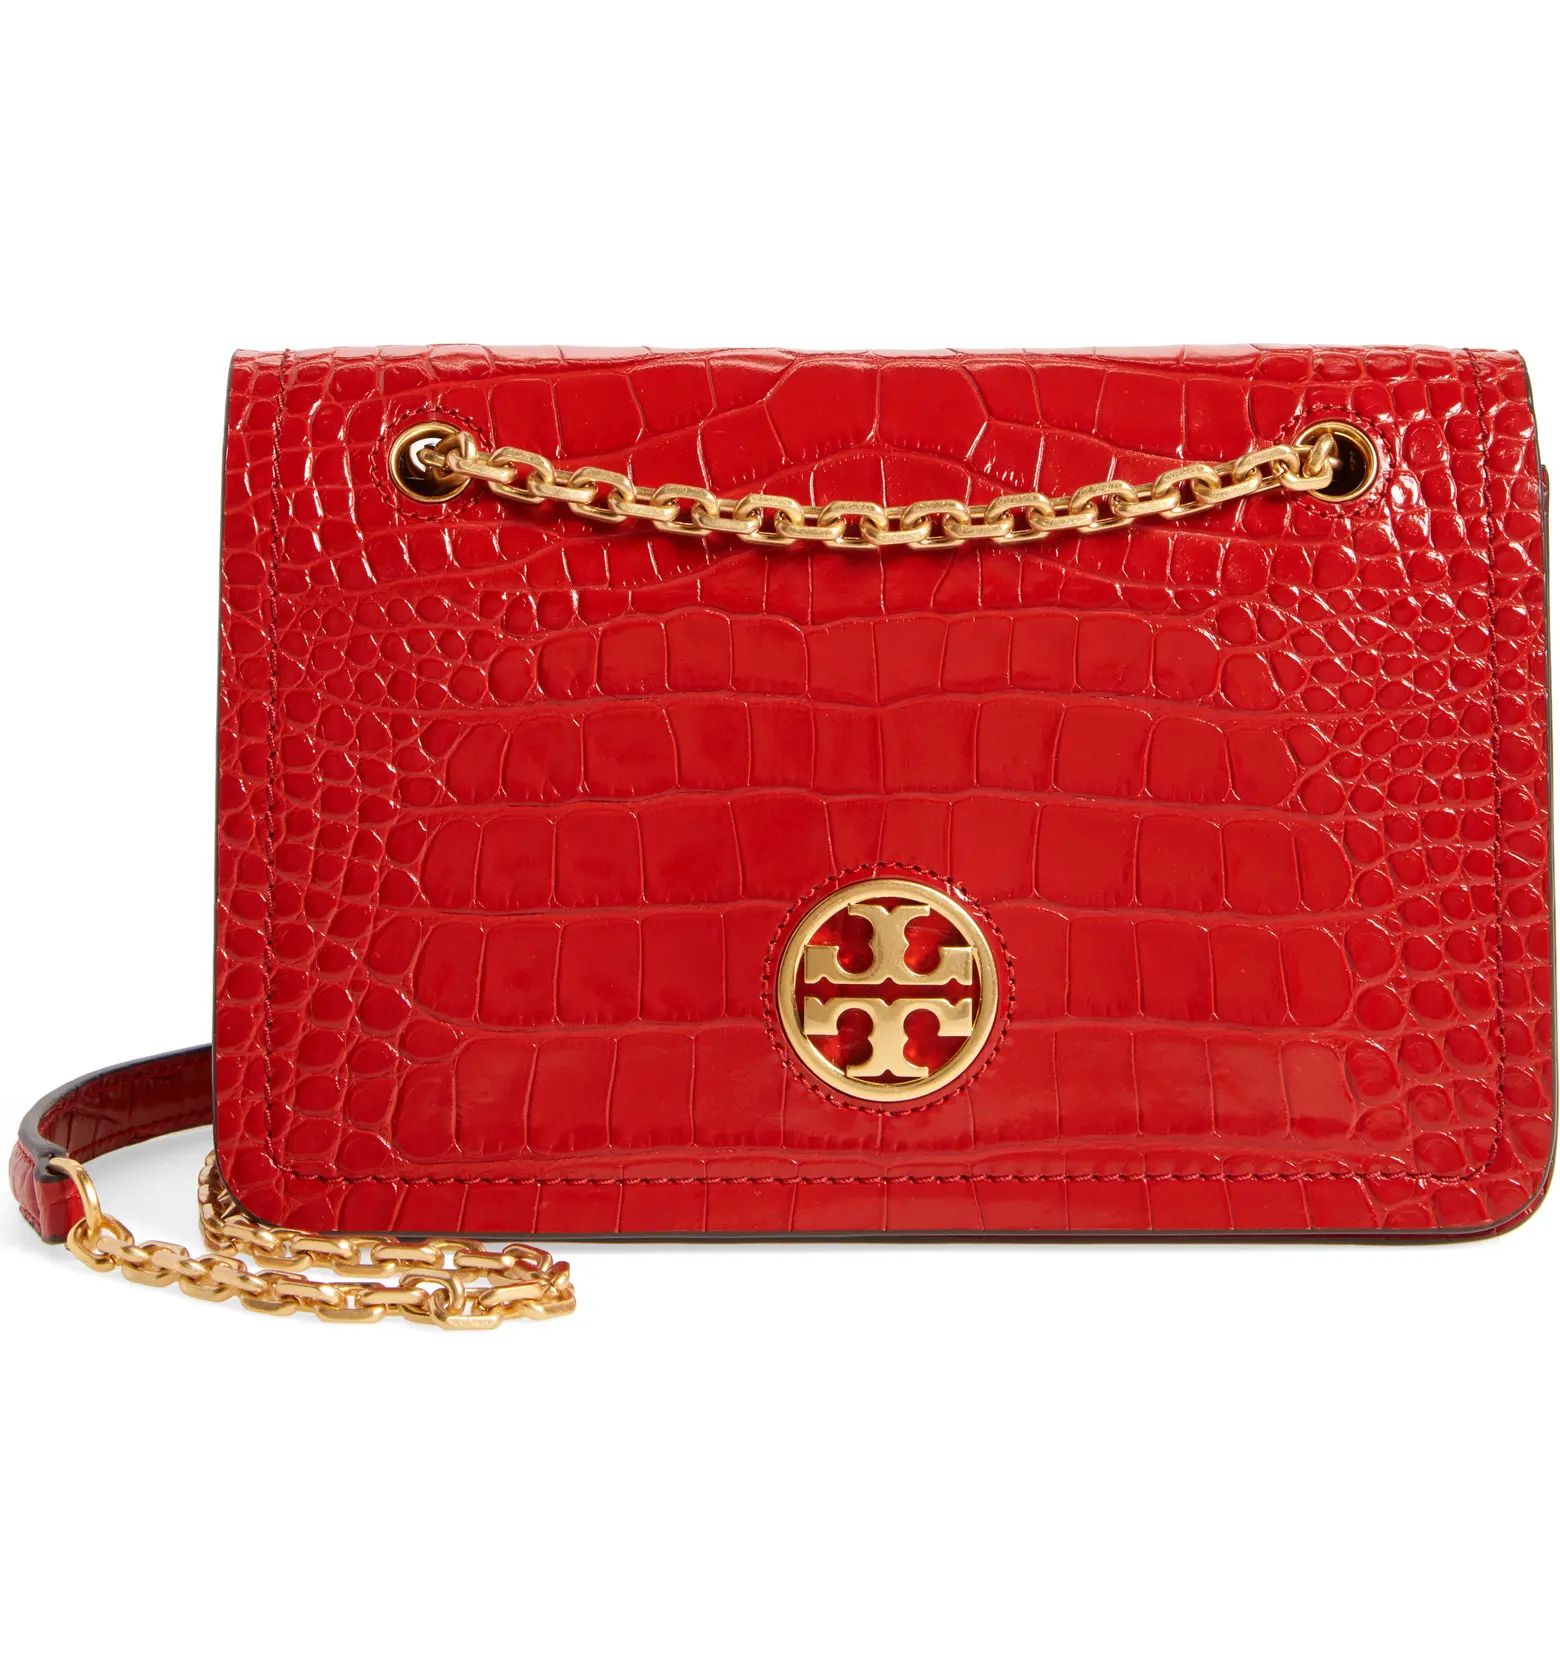 Carson Convertible Croc Embossed Leather Crossboby Bag | Nordstrom